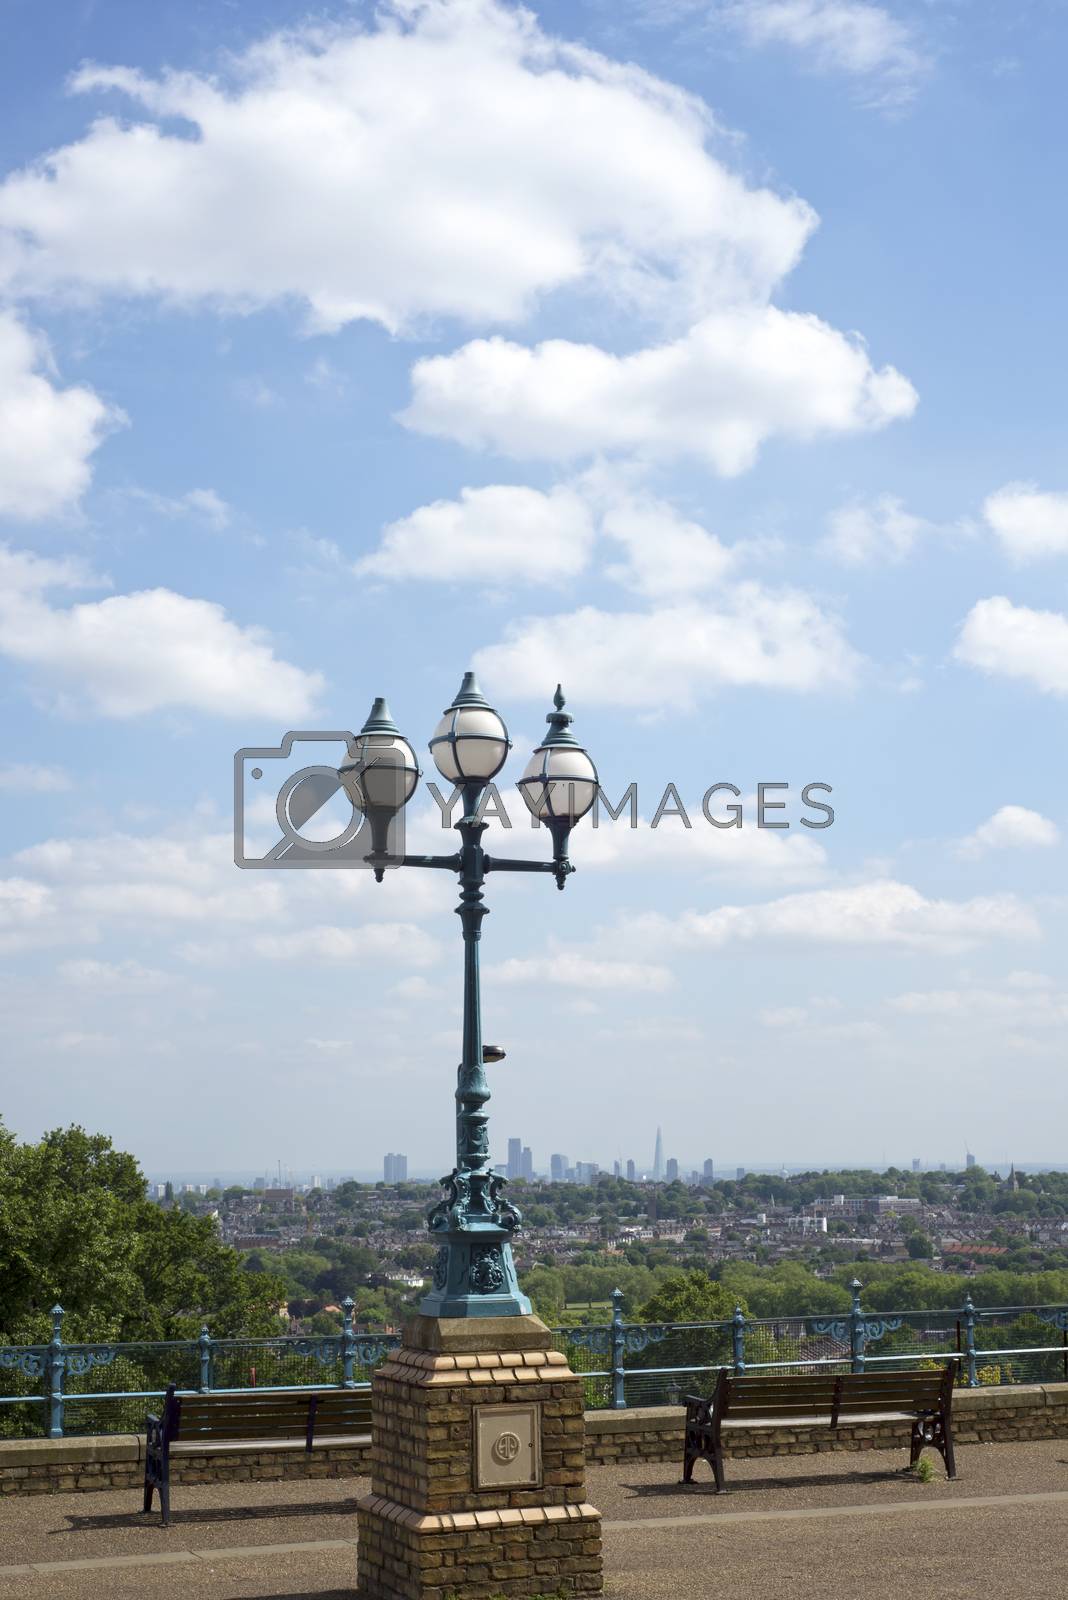 Royalty free image of antique street light with london city by morrbyte